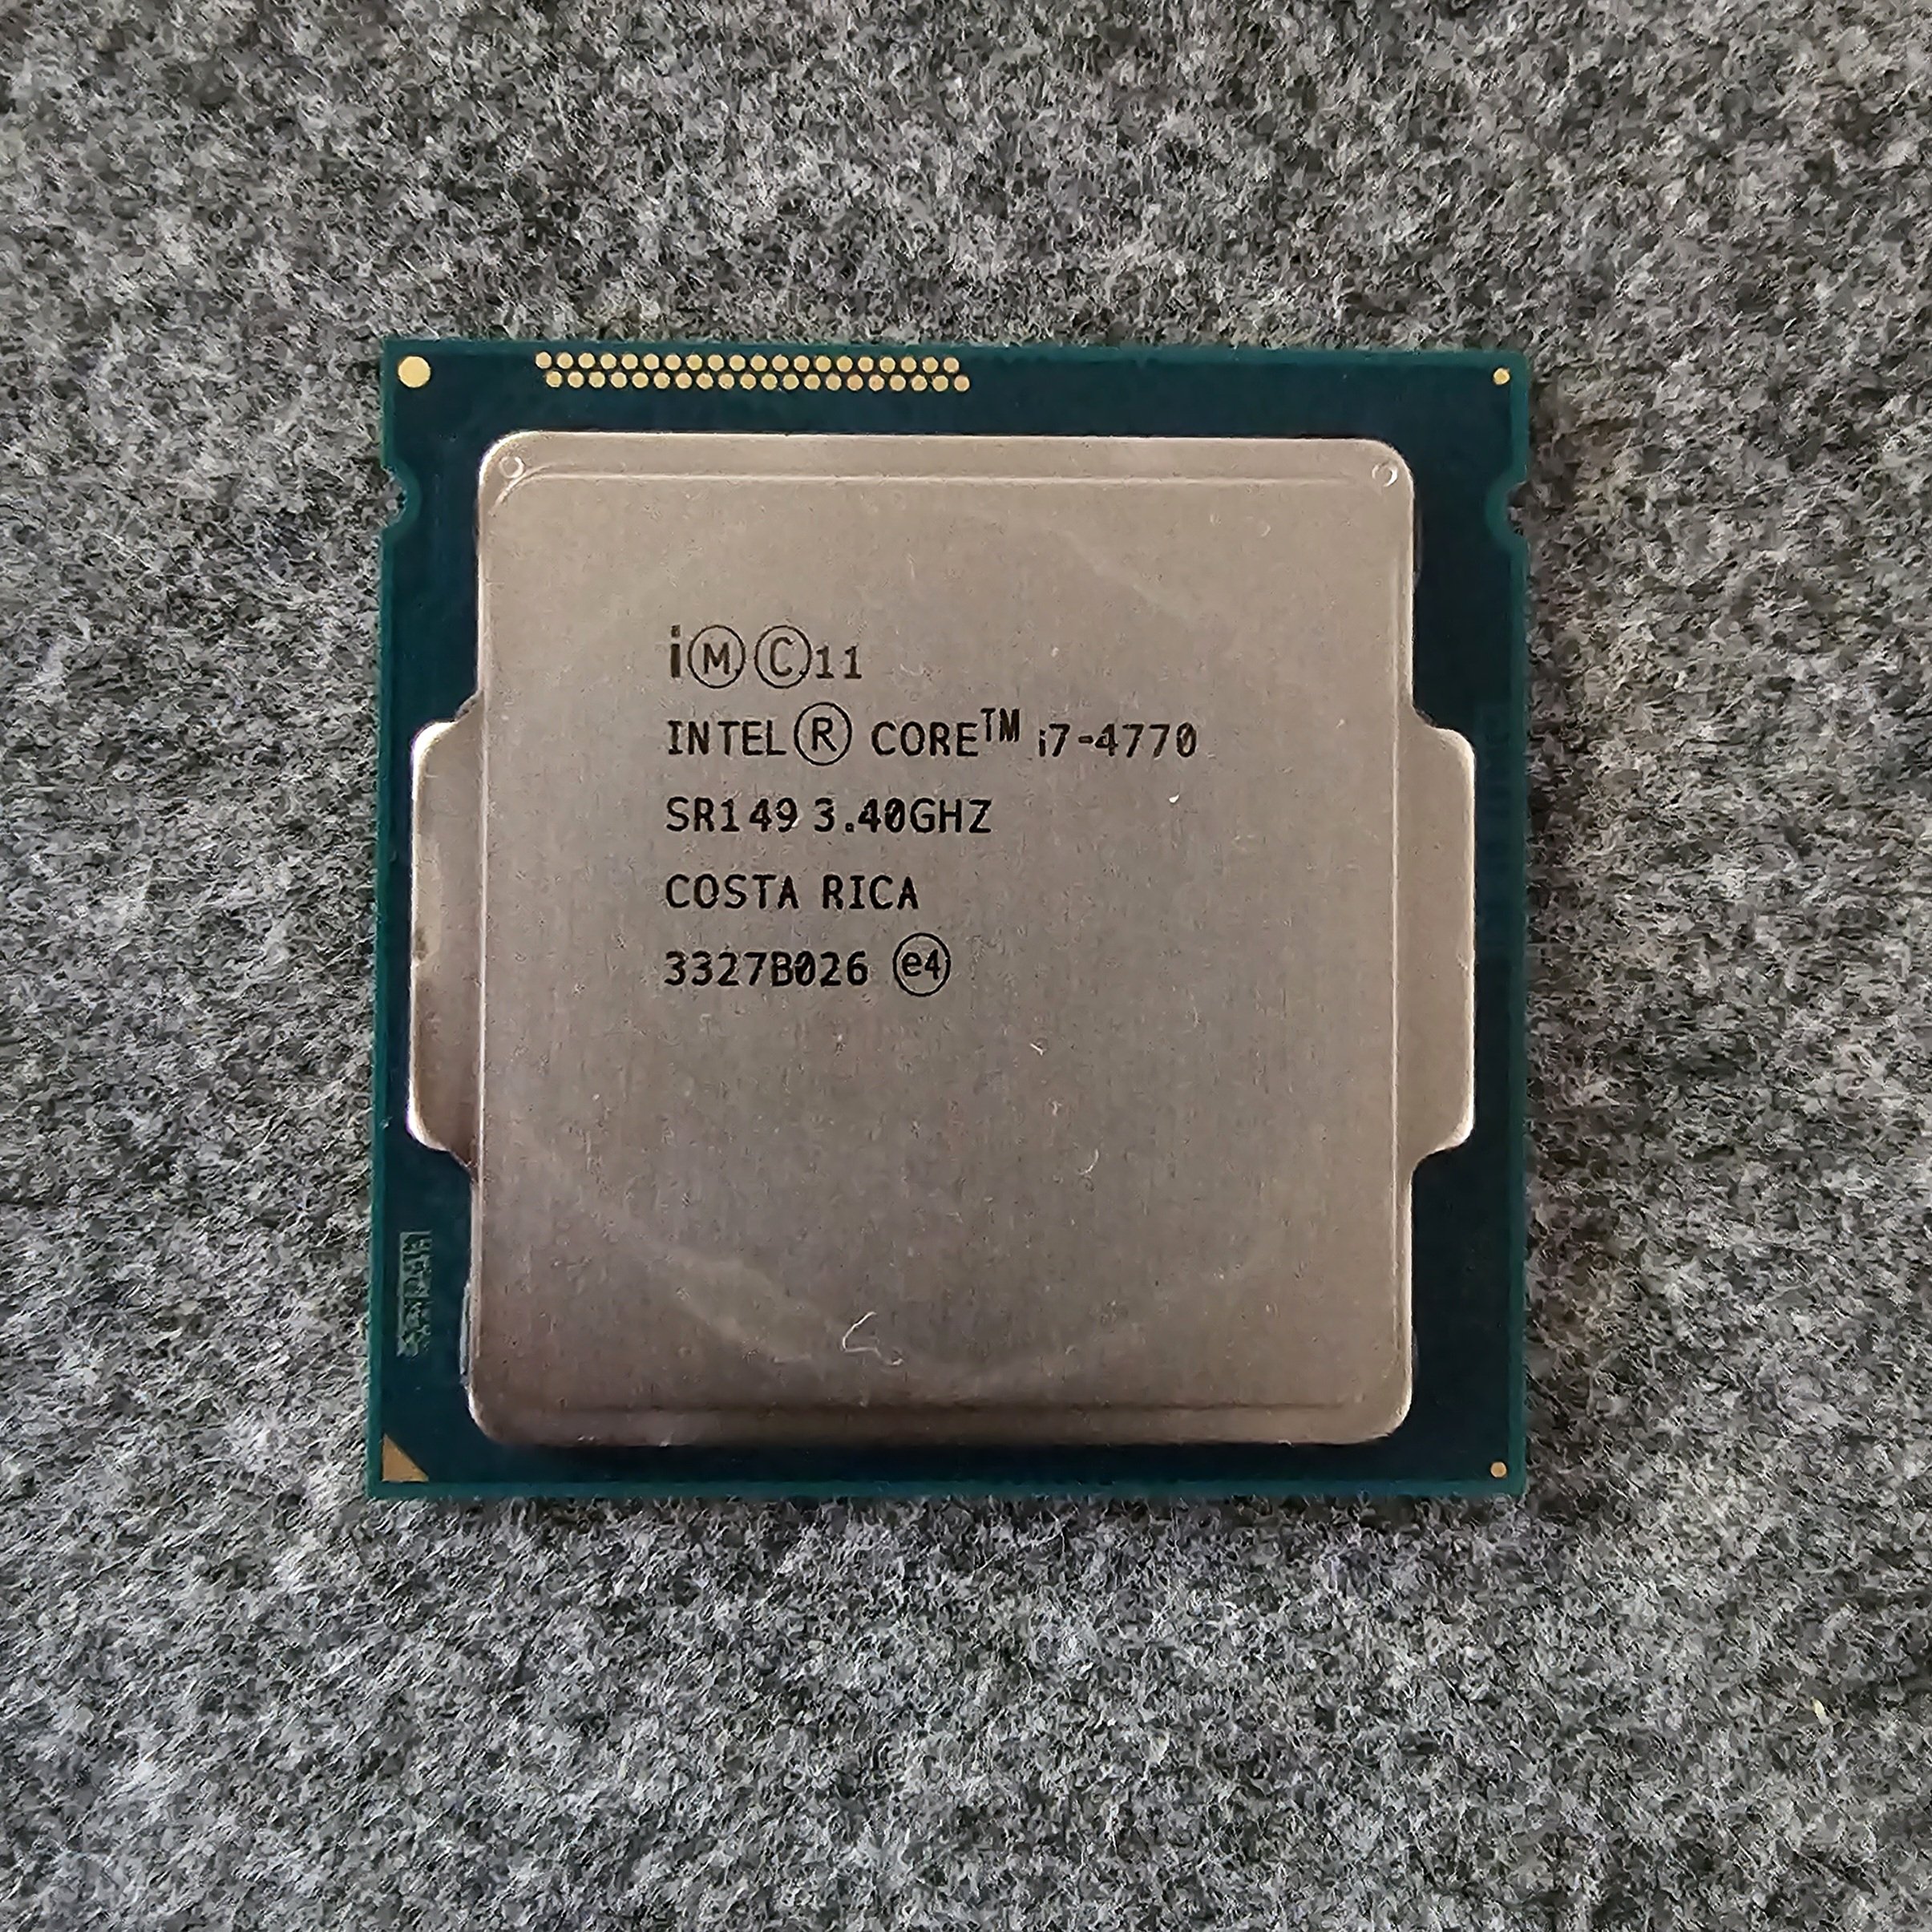 More information about "Intel Core i7 - 4770 (Tray)"